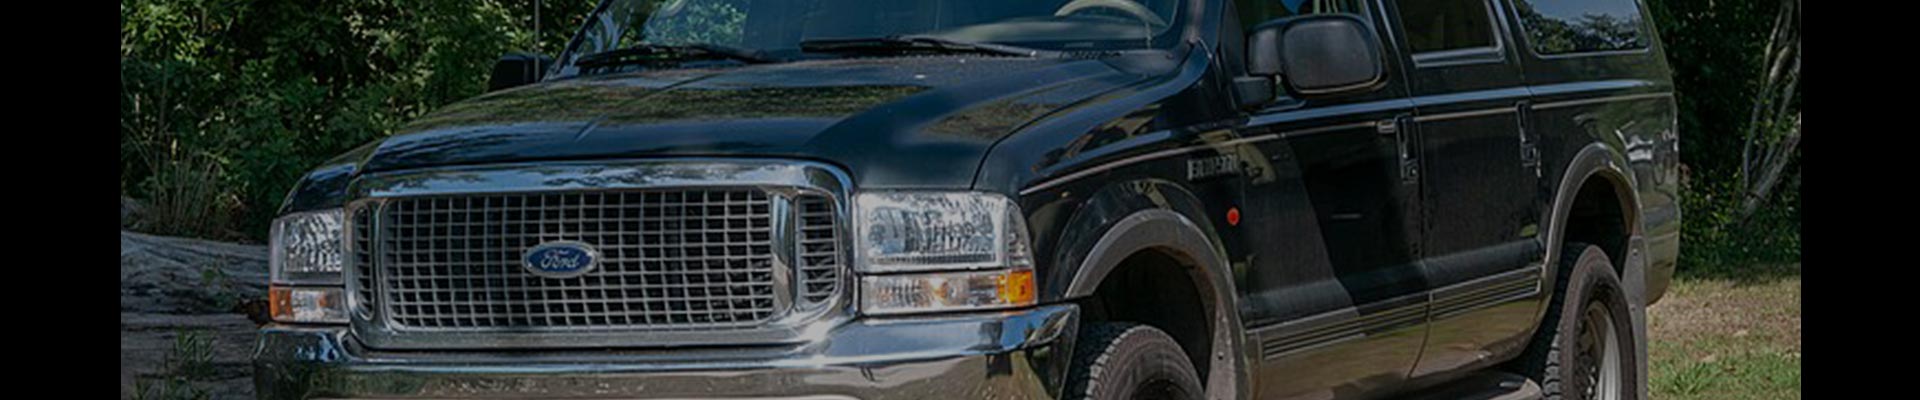 Parts for 2005 Ford Excursion